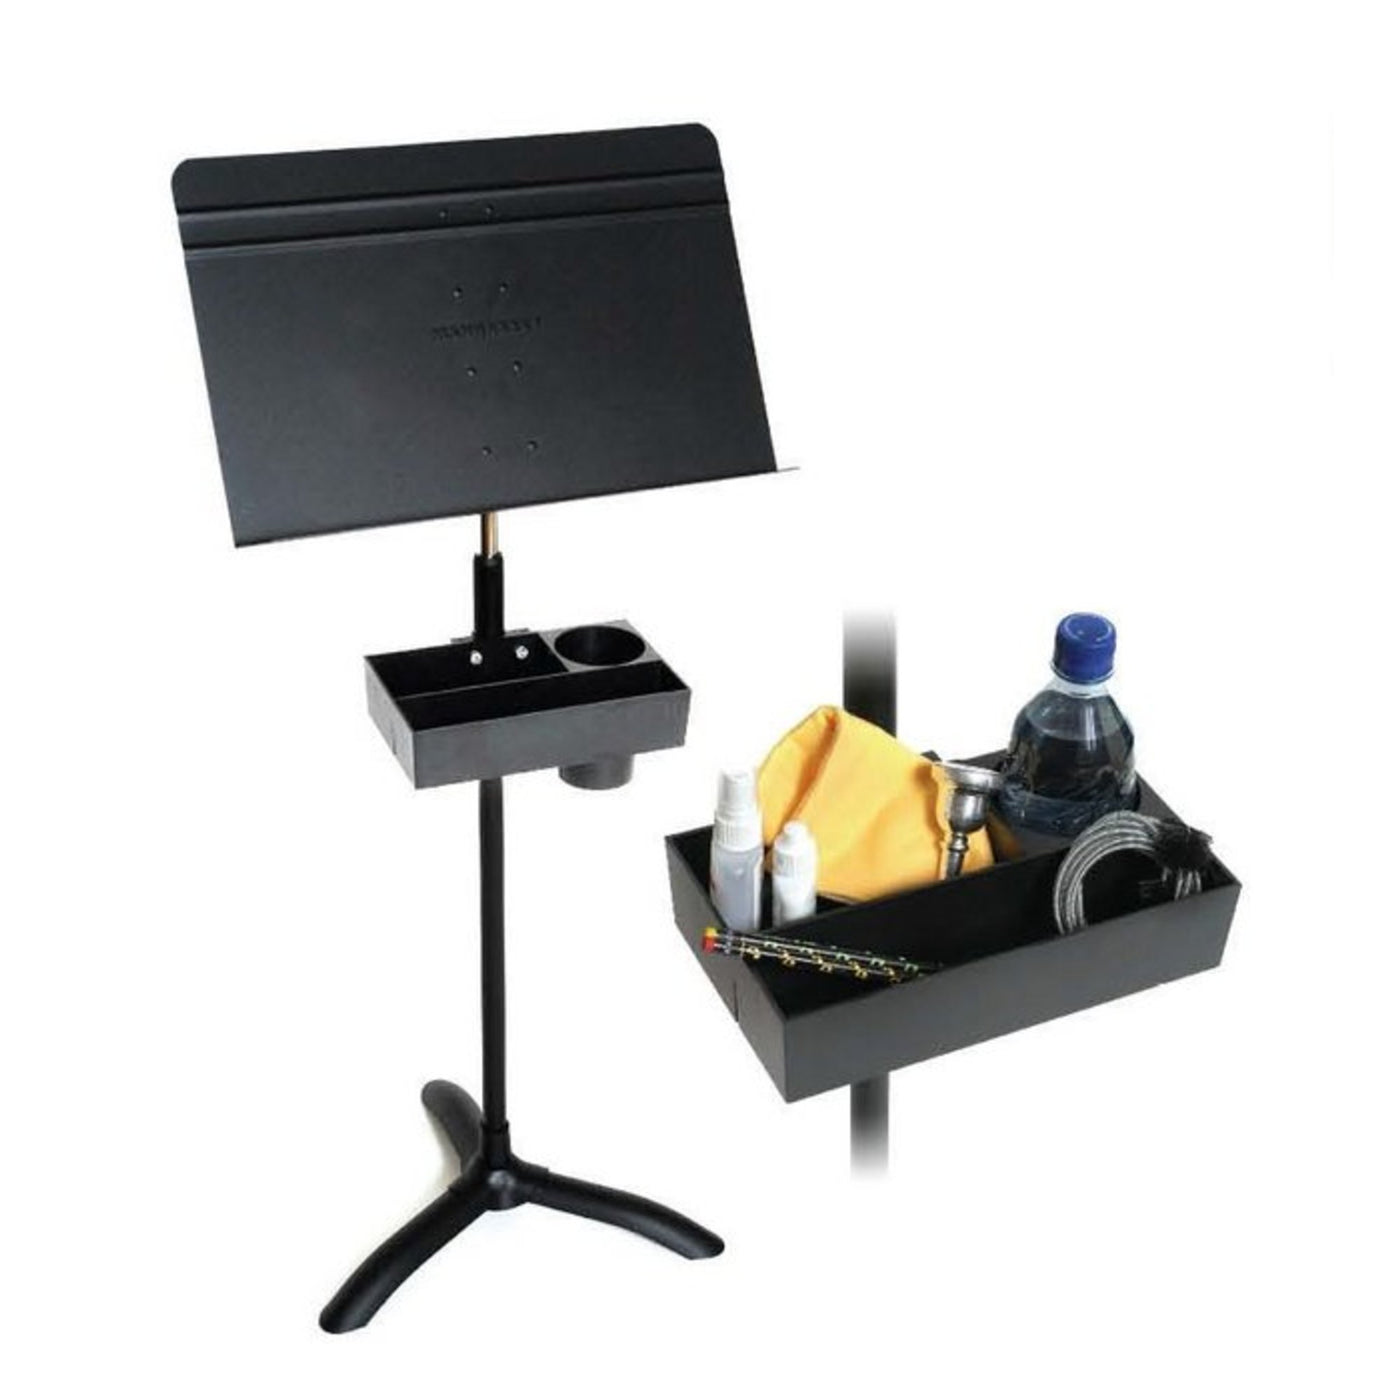 Manhasset Music Stand Accessory Box with Hanger, Black (2800)